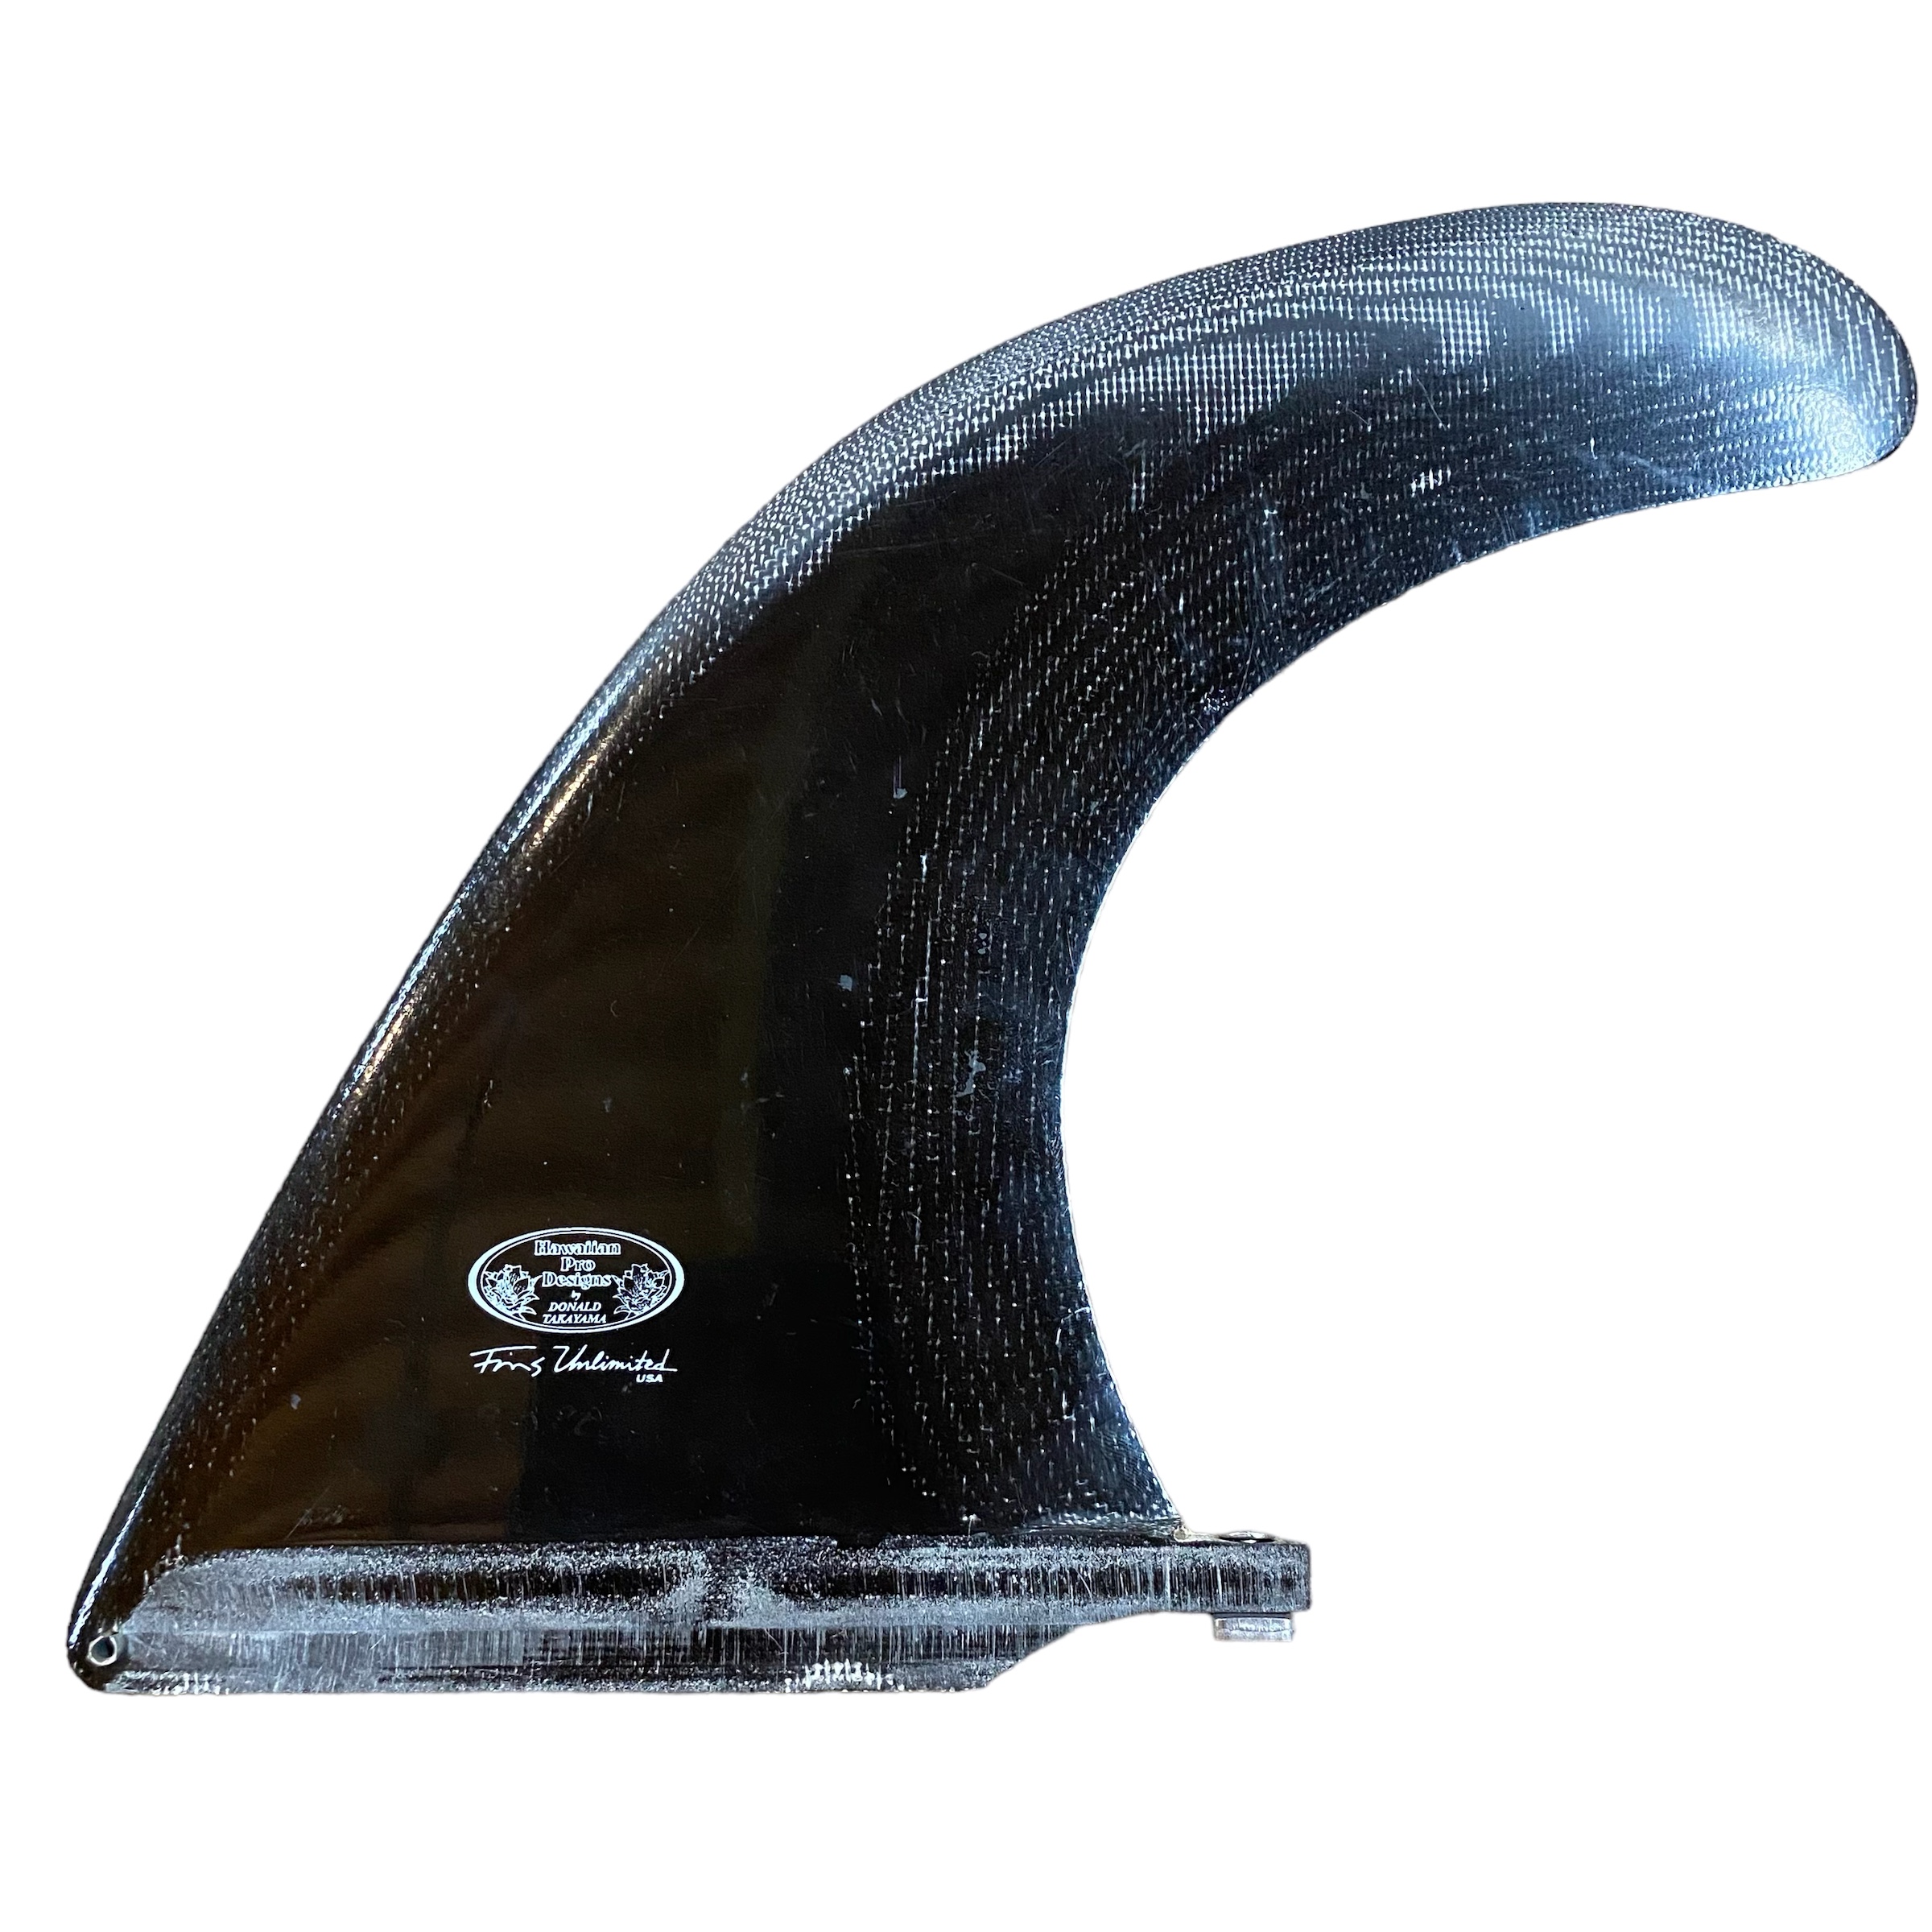 FINS UNLIMITED / HPD 10' / 中古フィン / USEDFIN